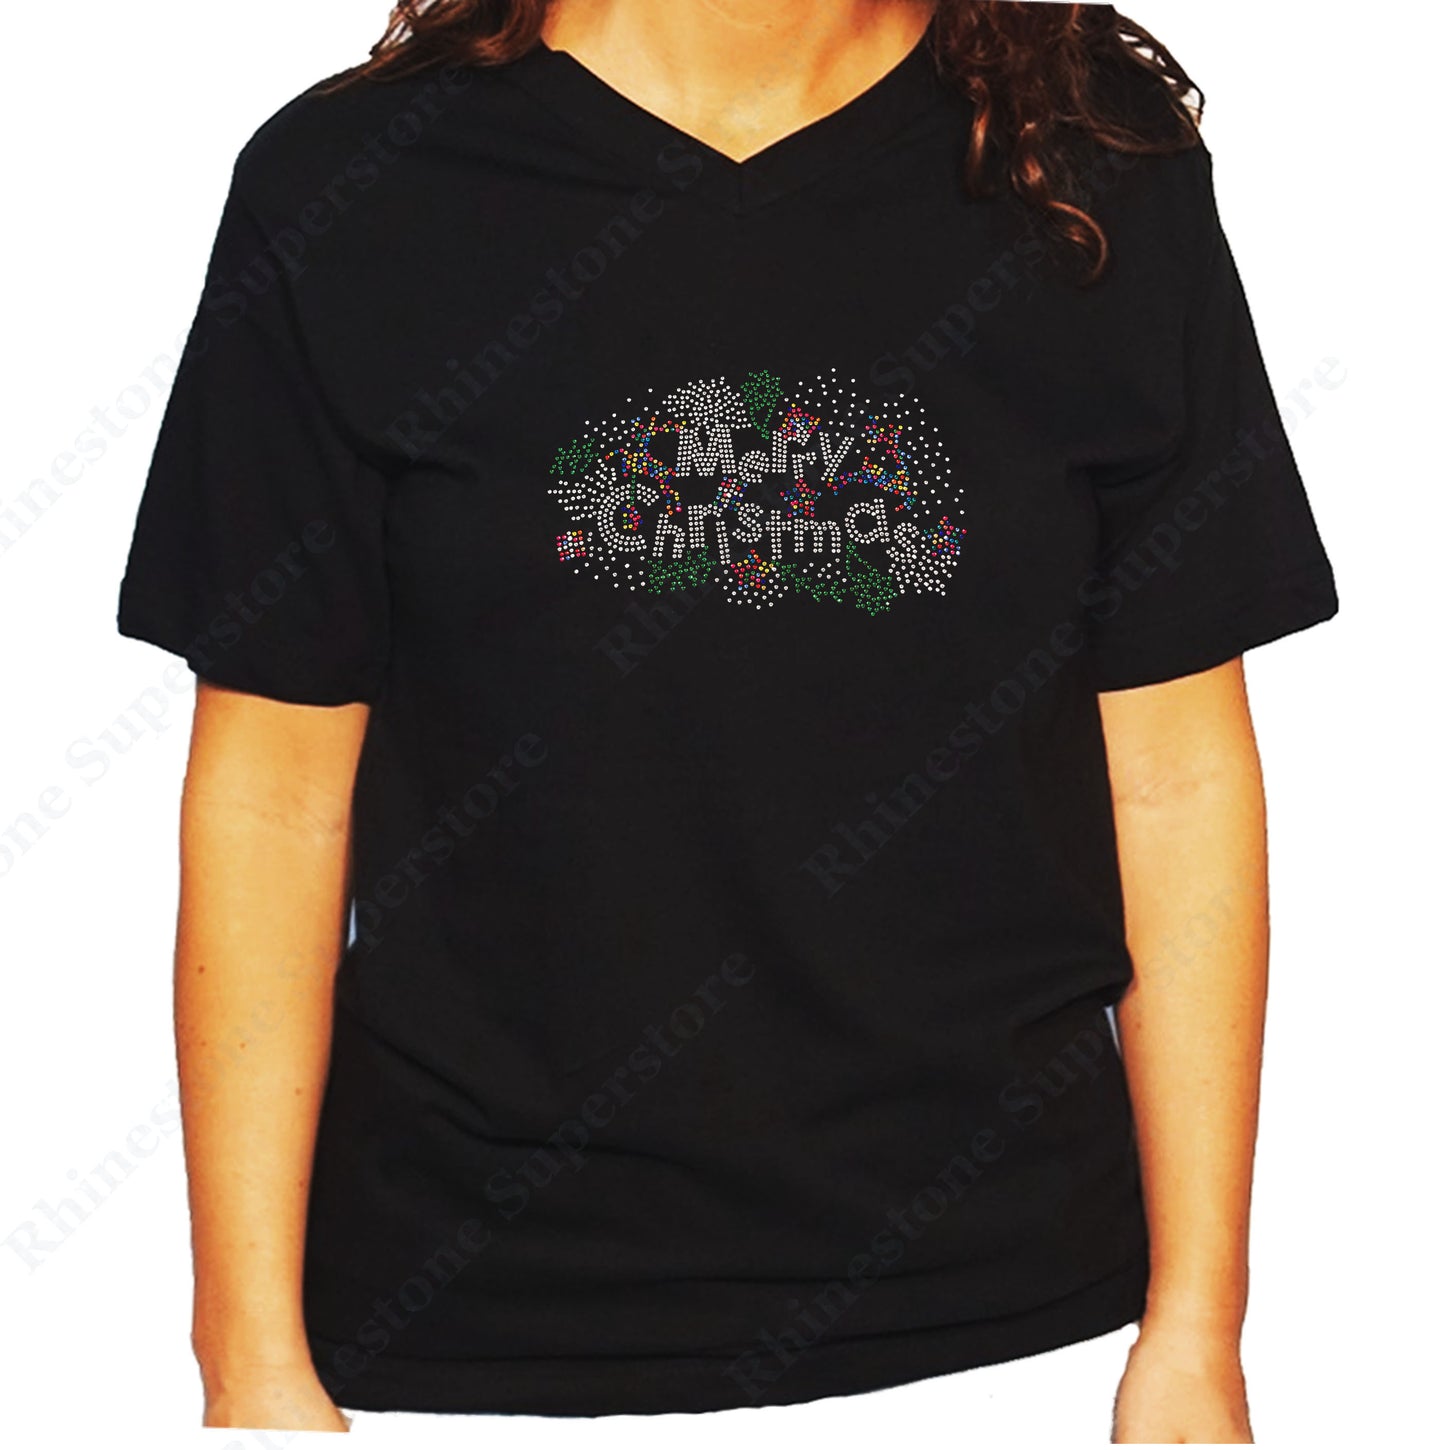 Women's / Unisex T-Shirt with Colorful Merry Christmas in Rhinestones